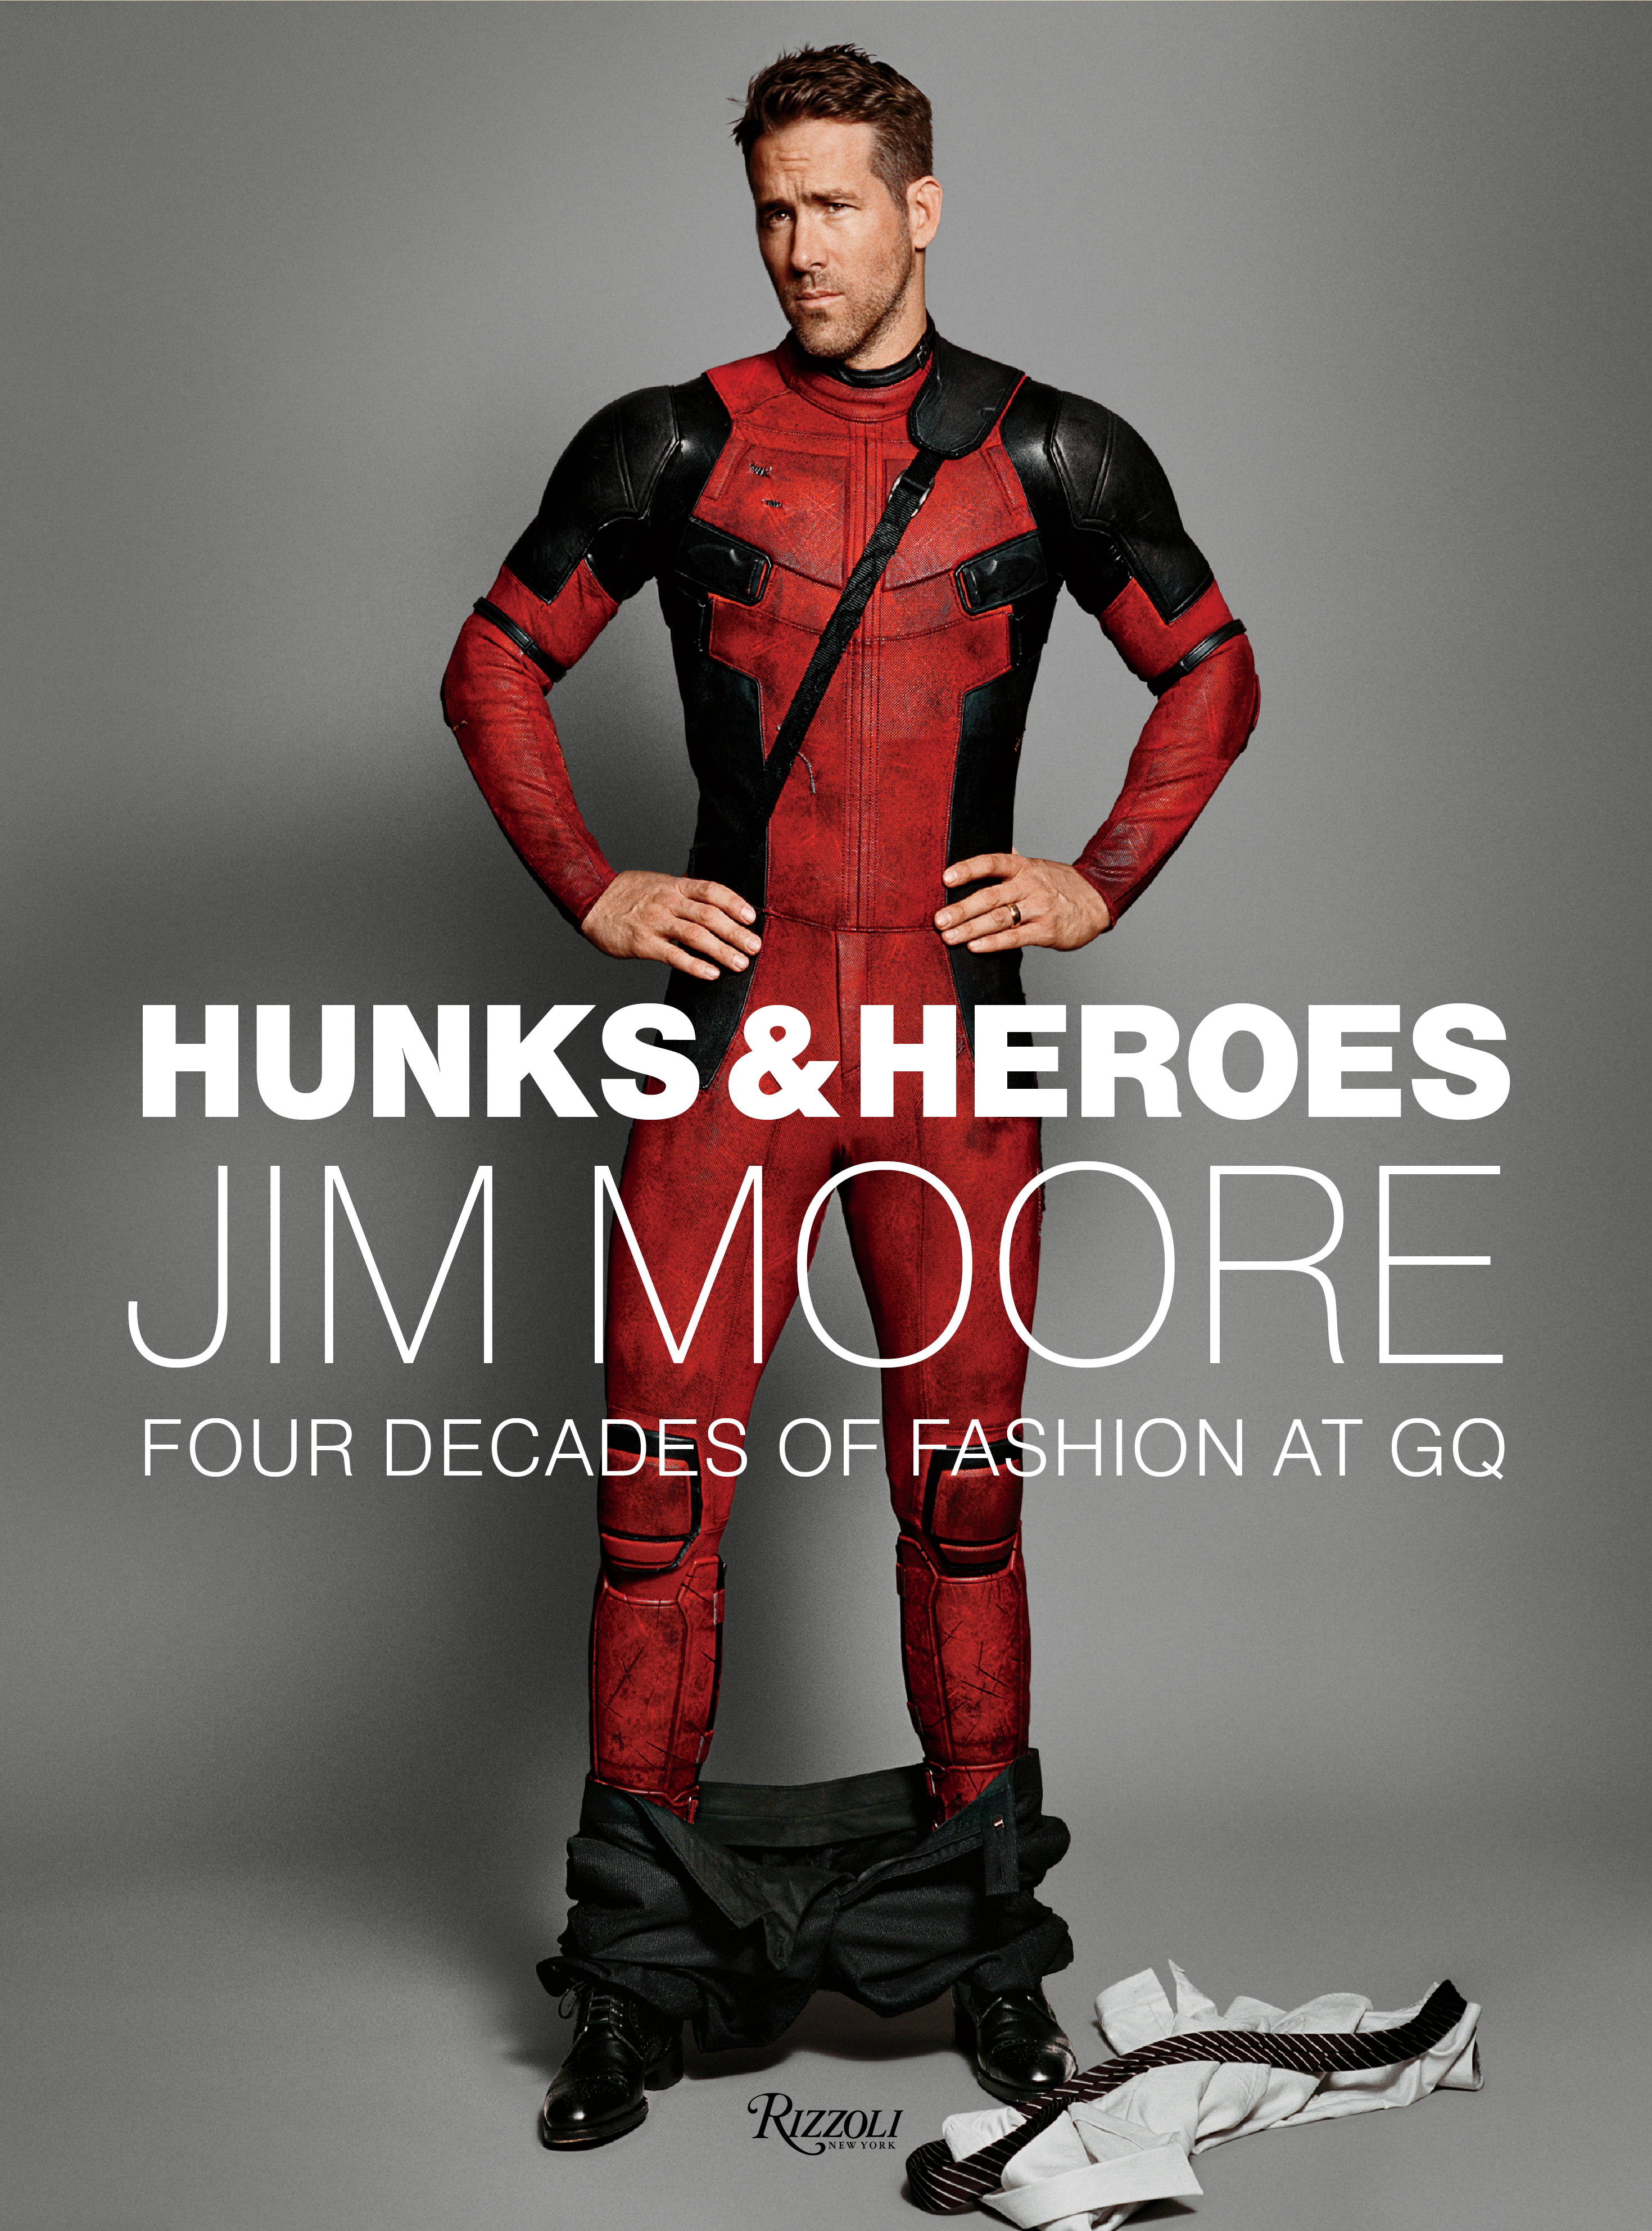 Hunks & Heroes: Four Decades of Fashion at GQ By Jim Moore